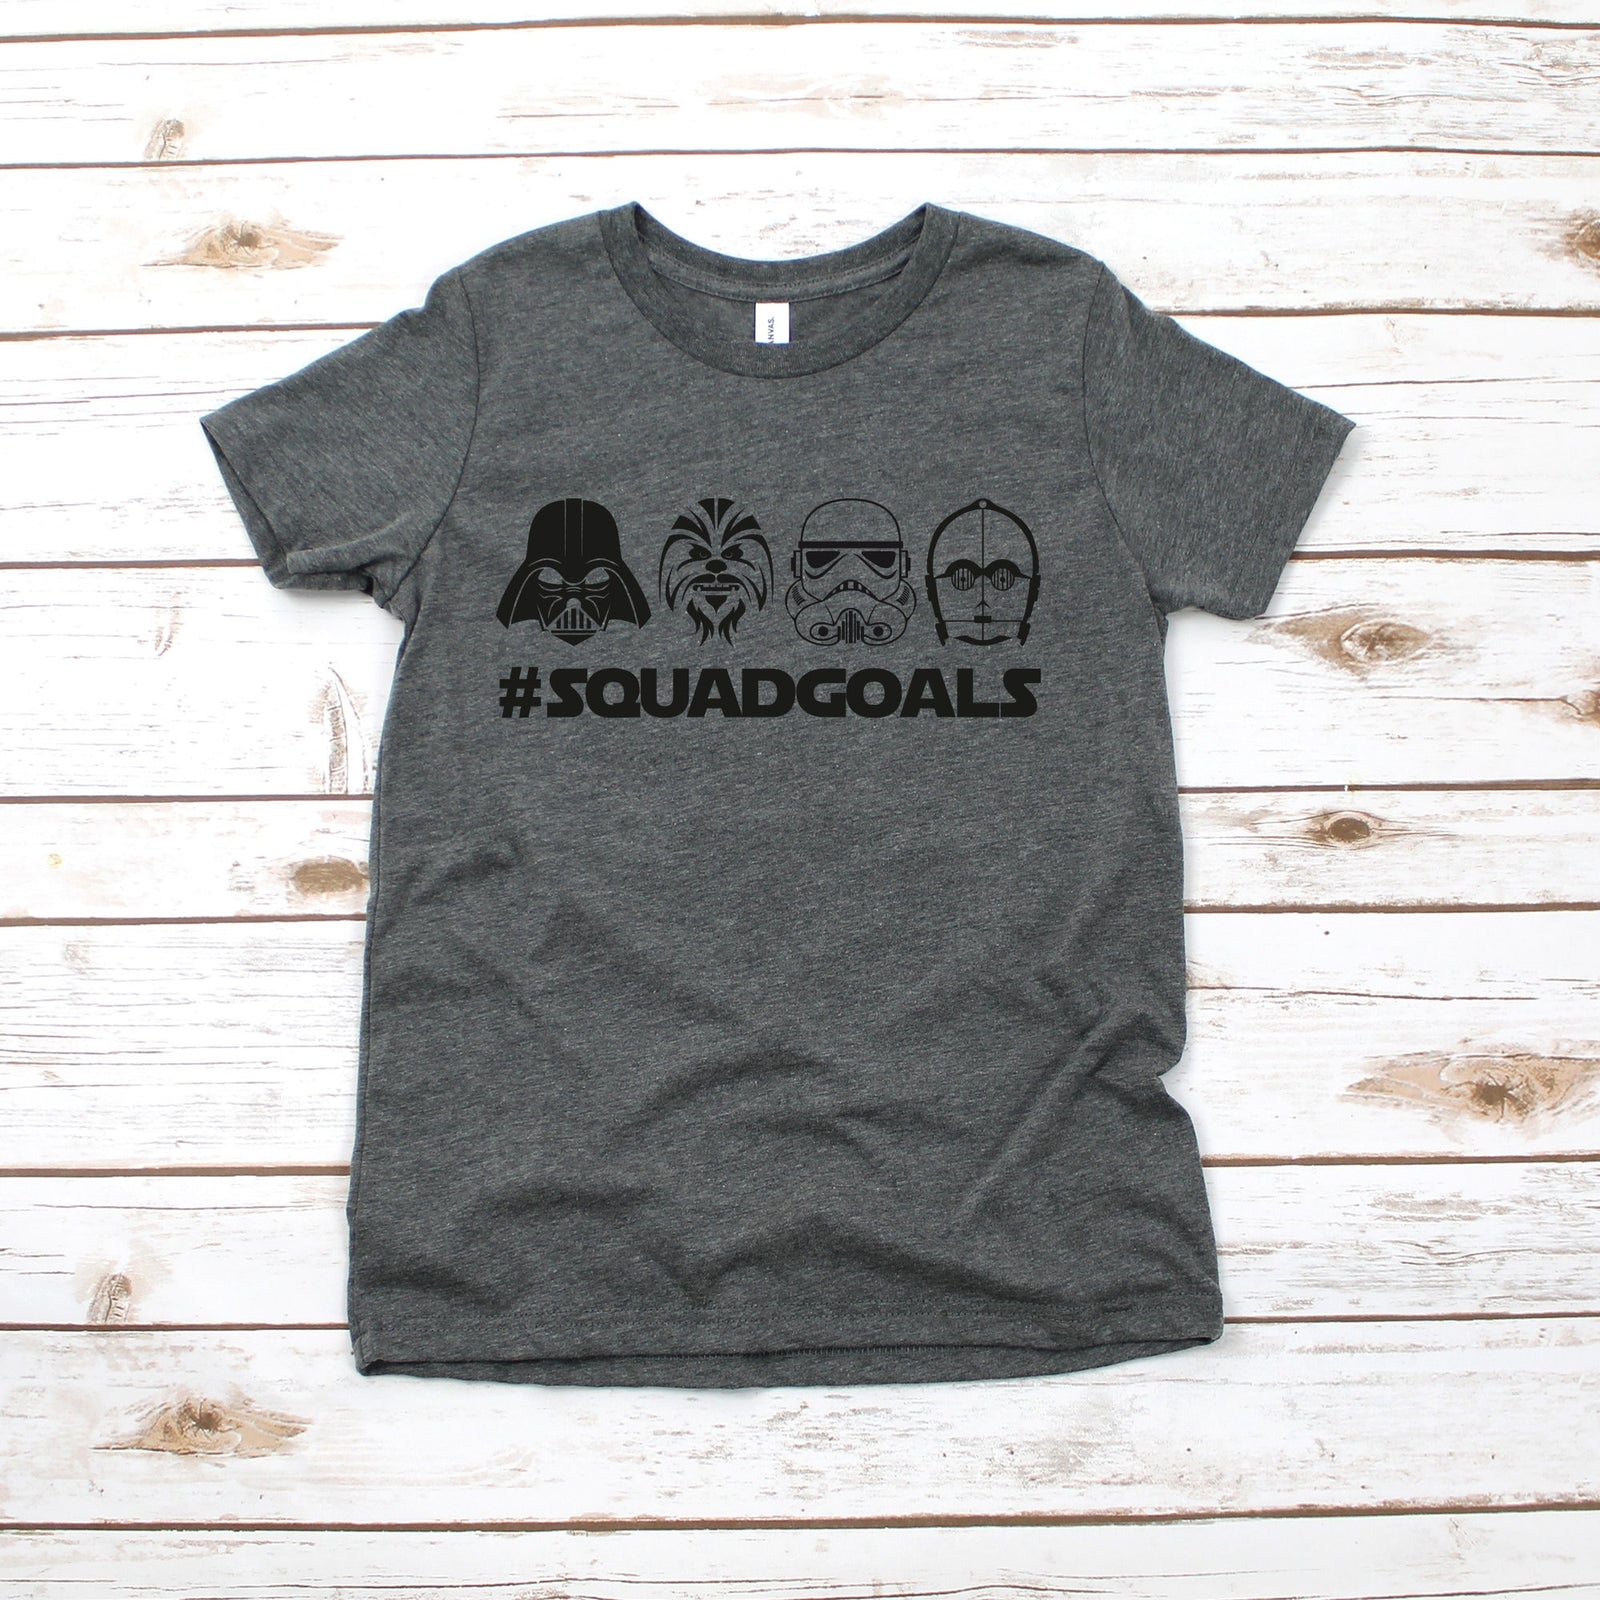 Star Wars Squad Goals Disney Youth T Shirt - Infant Toddler or Youth - Custom Shirts